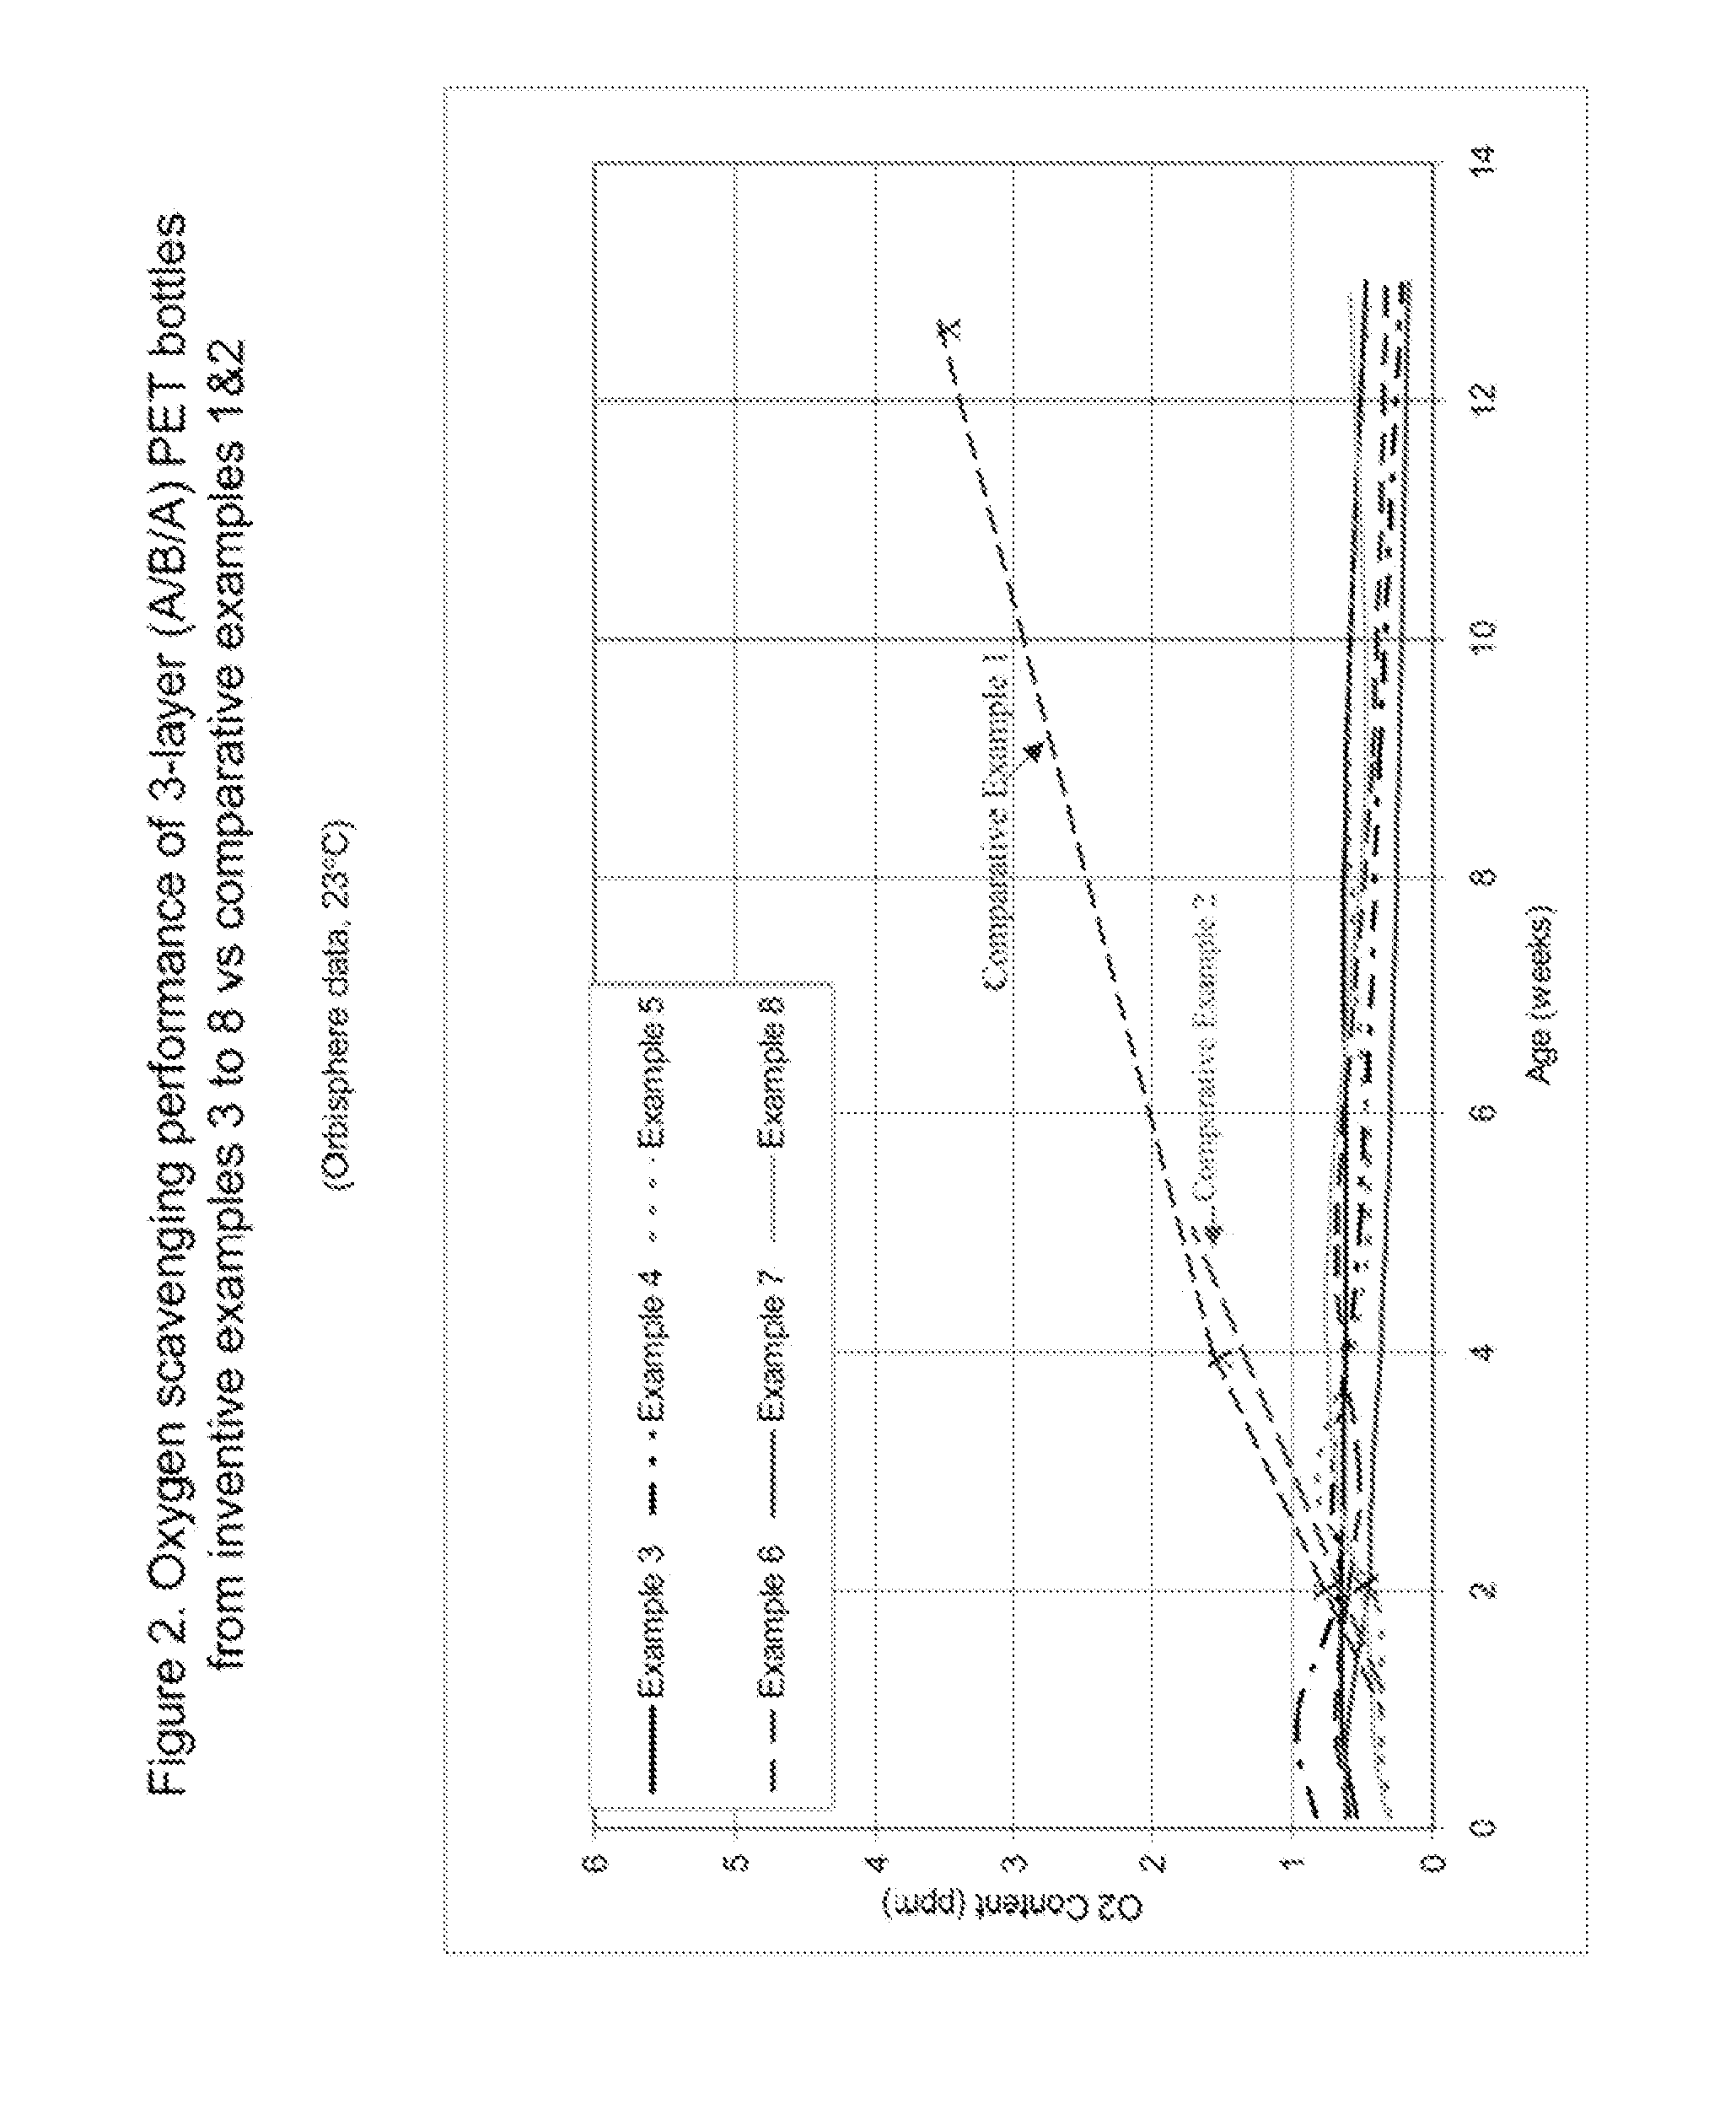 Low phosphorous oxygen scavenging compositions requiring no induction period